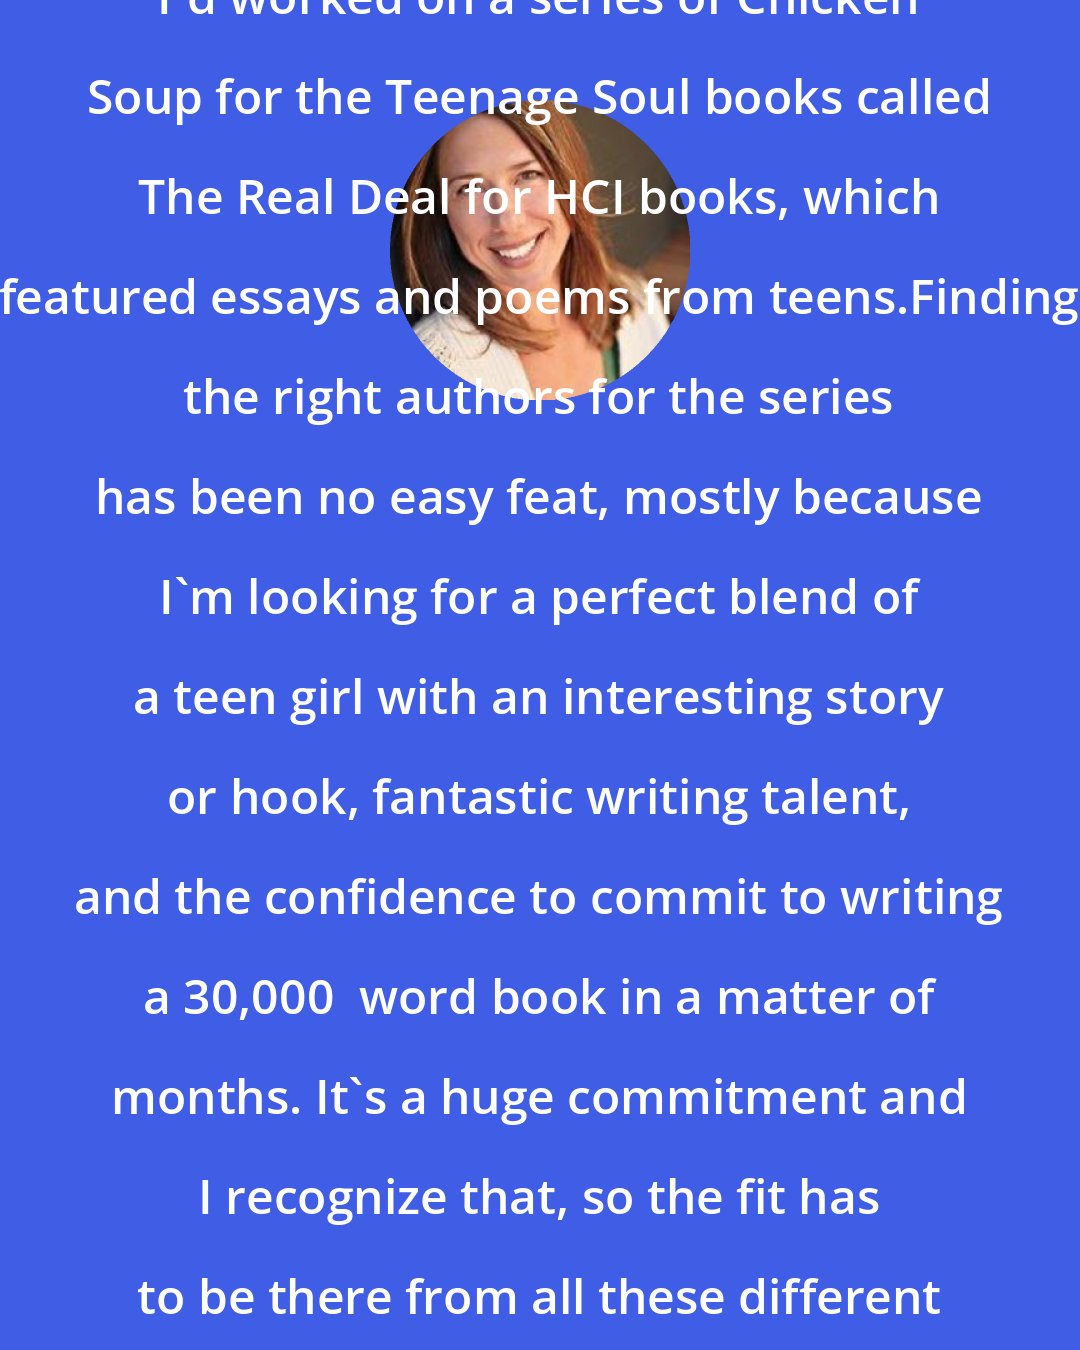 Deborah Reber: I'd worked on a series of Chicken Soup for the Teenage Soul books called The Real Deal for HCI books, which featured essays and poems from teens.Finding the right authors for the series has been no easy feat, mostly because I'm looking for a perfect blend of a teen girl with an interesting story or hook, fantastic writing talent, and the confidence to commit to writing a 30,000+ word book in a matter of months. It's a huge commitment and I recognize that, so the fit has to be there from all these different angles.